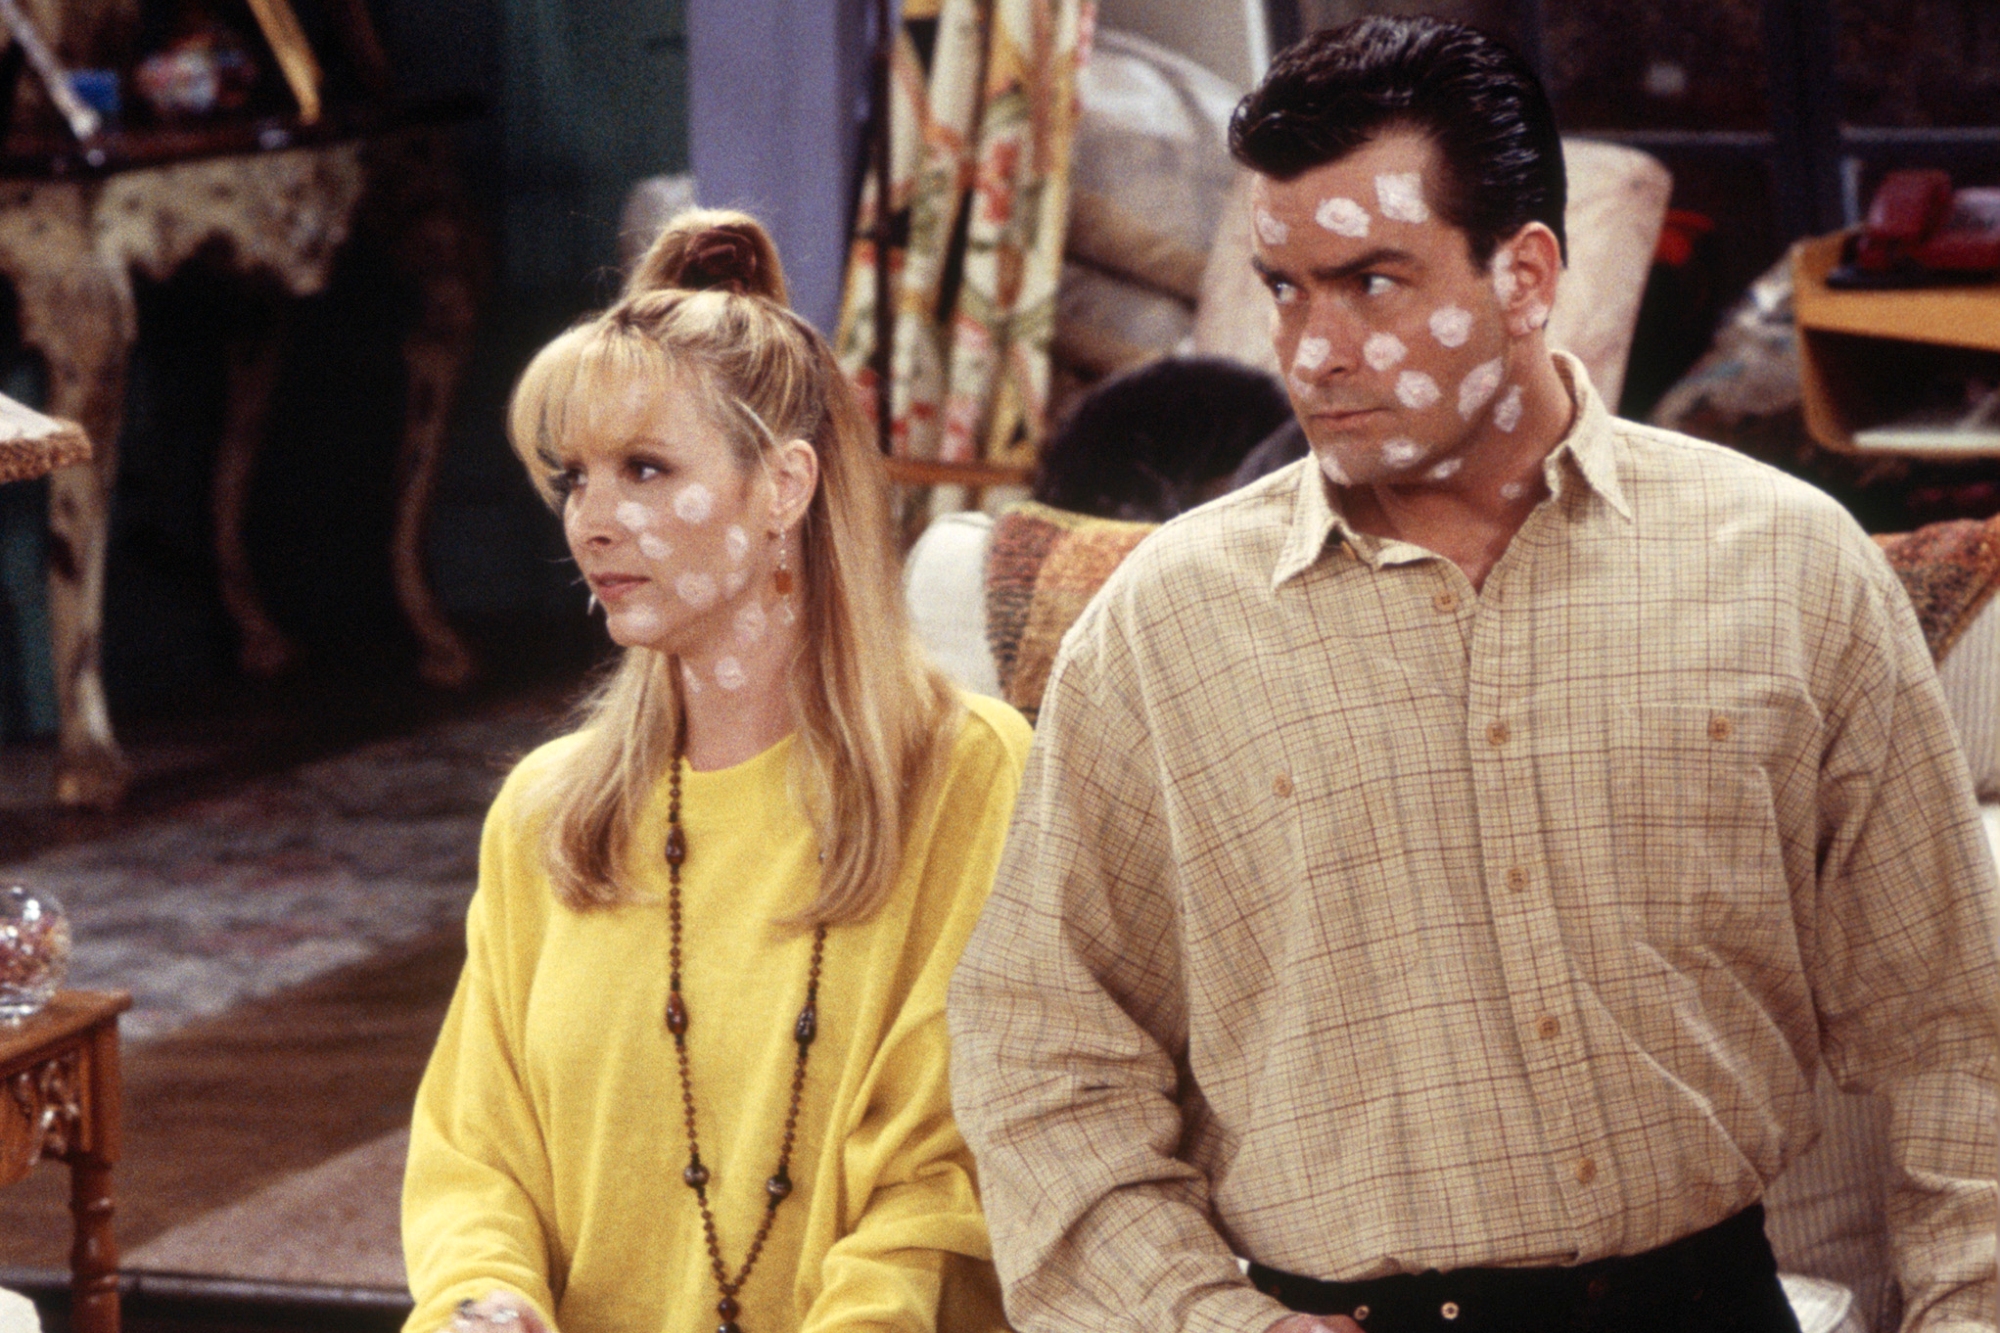 'Friends' Lisa Kudrow as Phoebe Buffay and Charlie Sheen as Ryan. Kudrow is wearing a yellow outfit and Sheen is wearing a tan collared shirt. They both have white spots all over to cover their chicken pox.